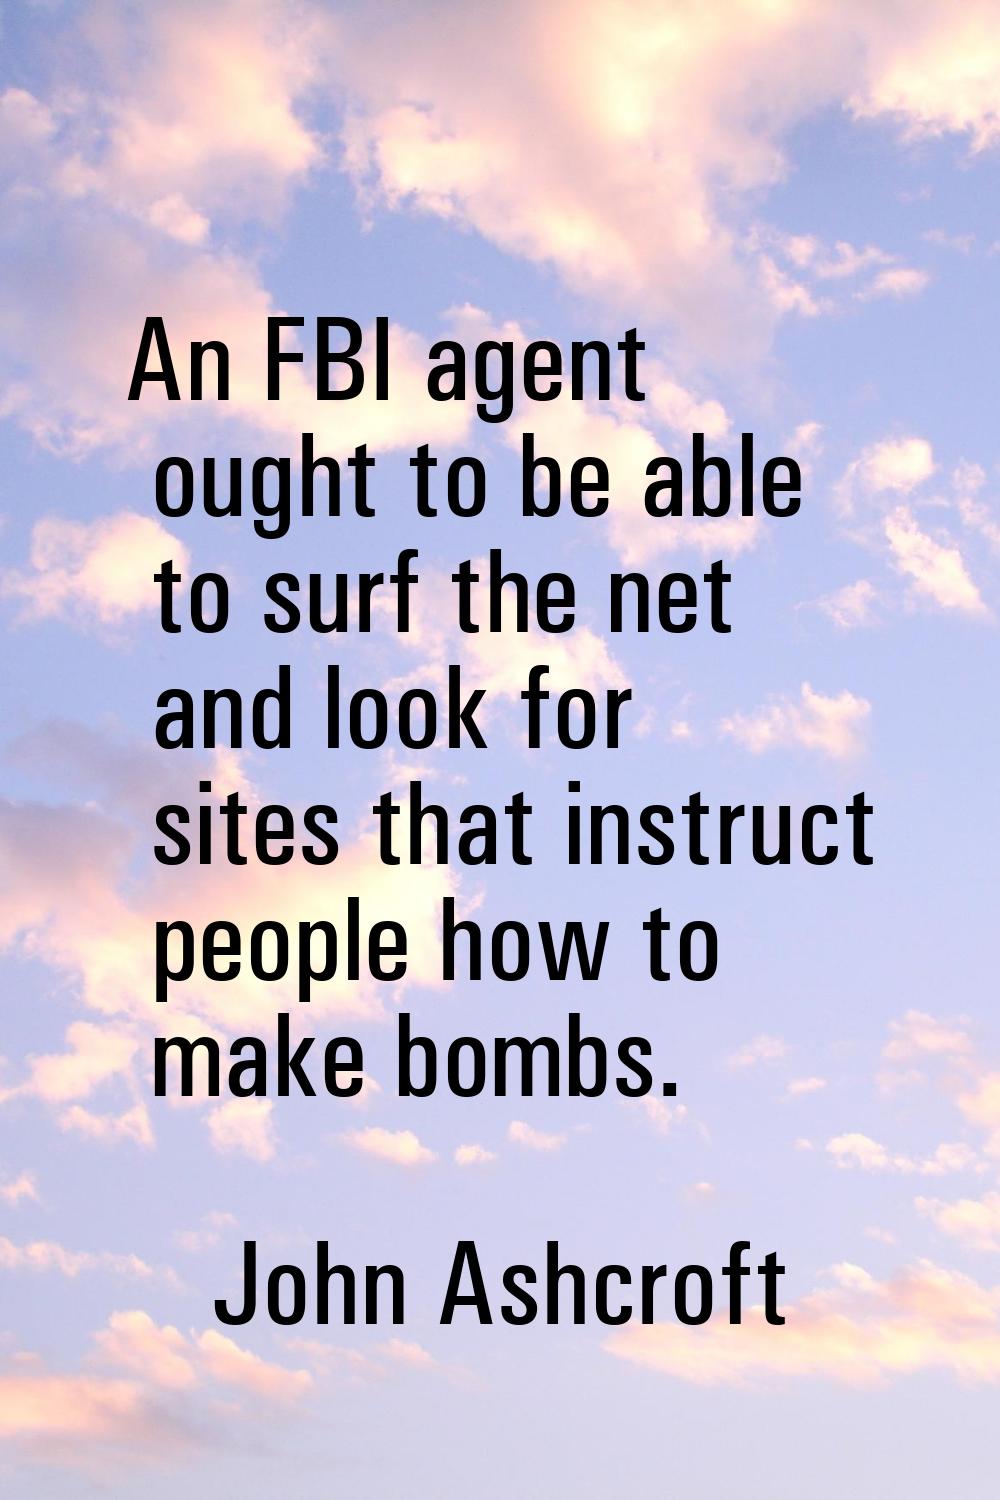 An FBI agent ought to be able to surf the net and look for sites that instruct people how to make b